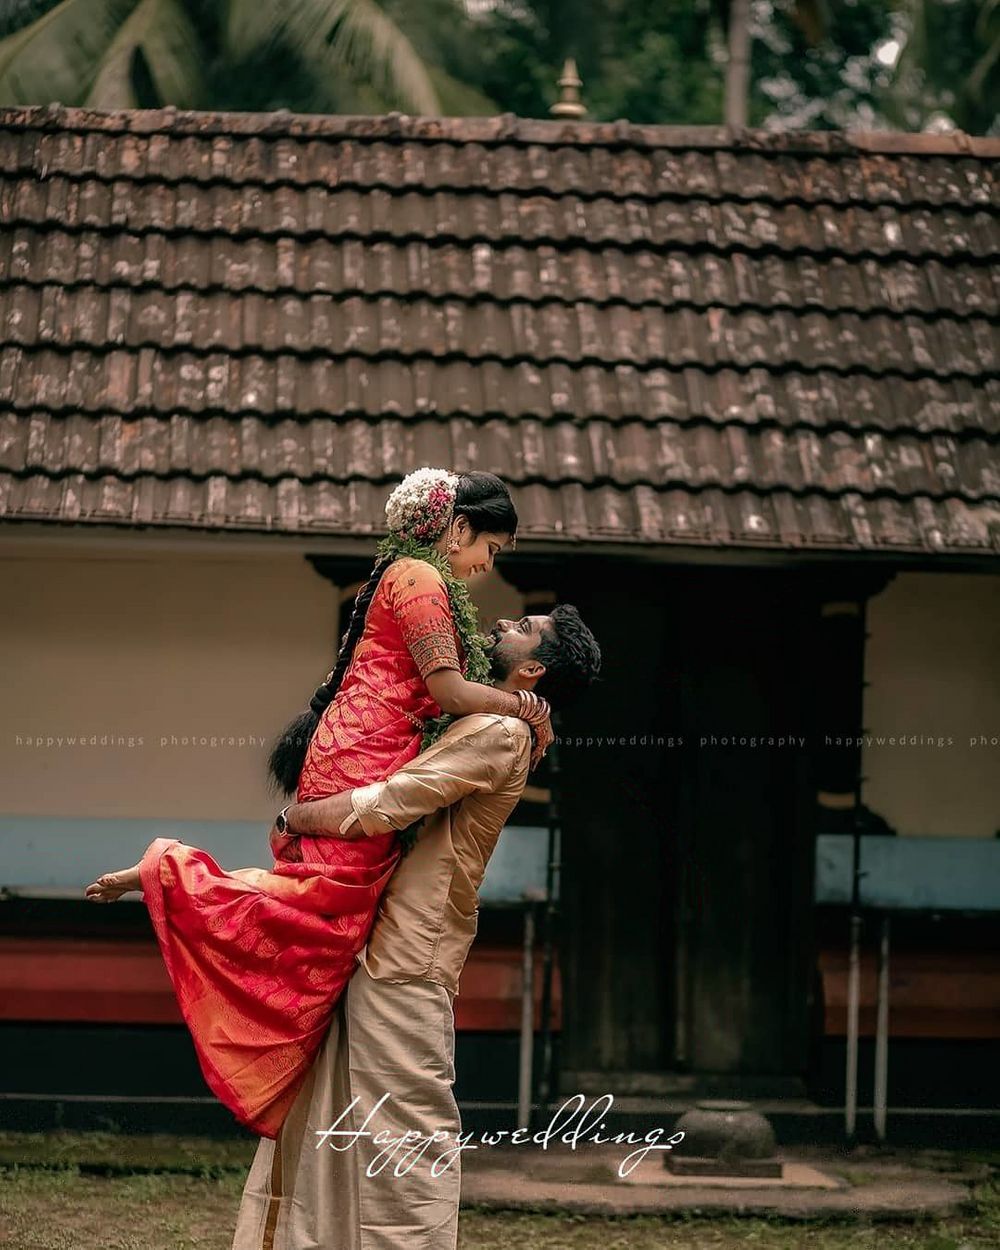 Photo From Kerala Traditional Wedding - By Happy Weddings